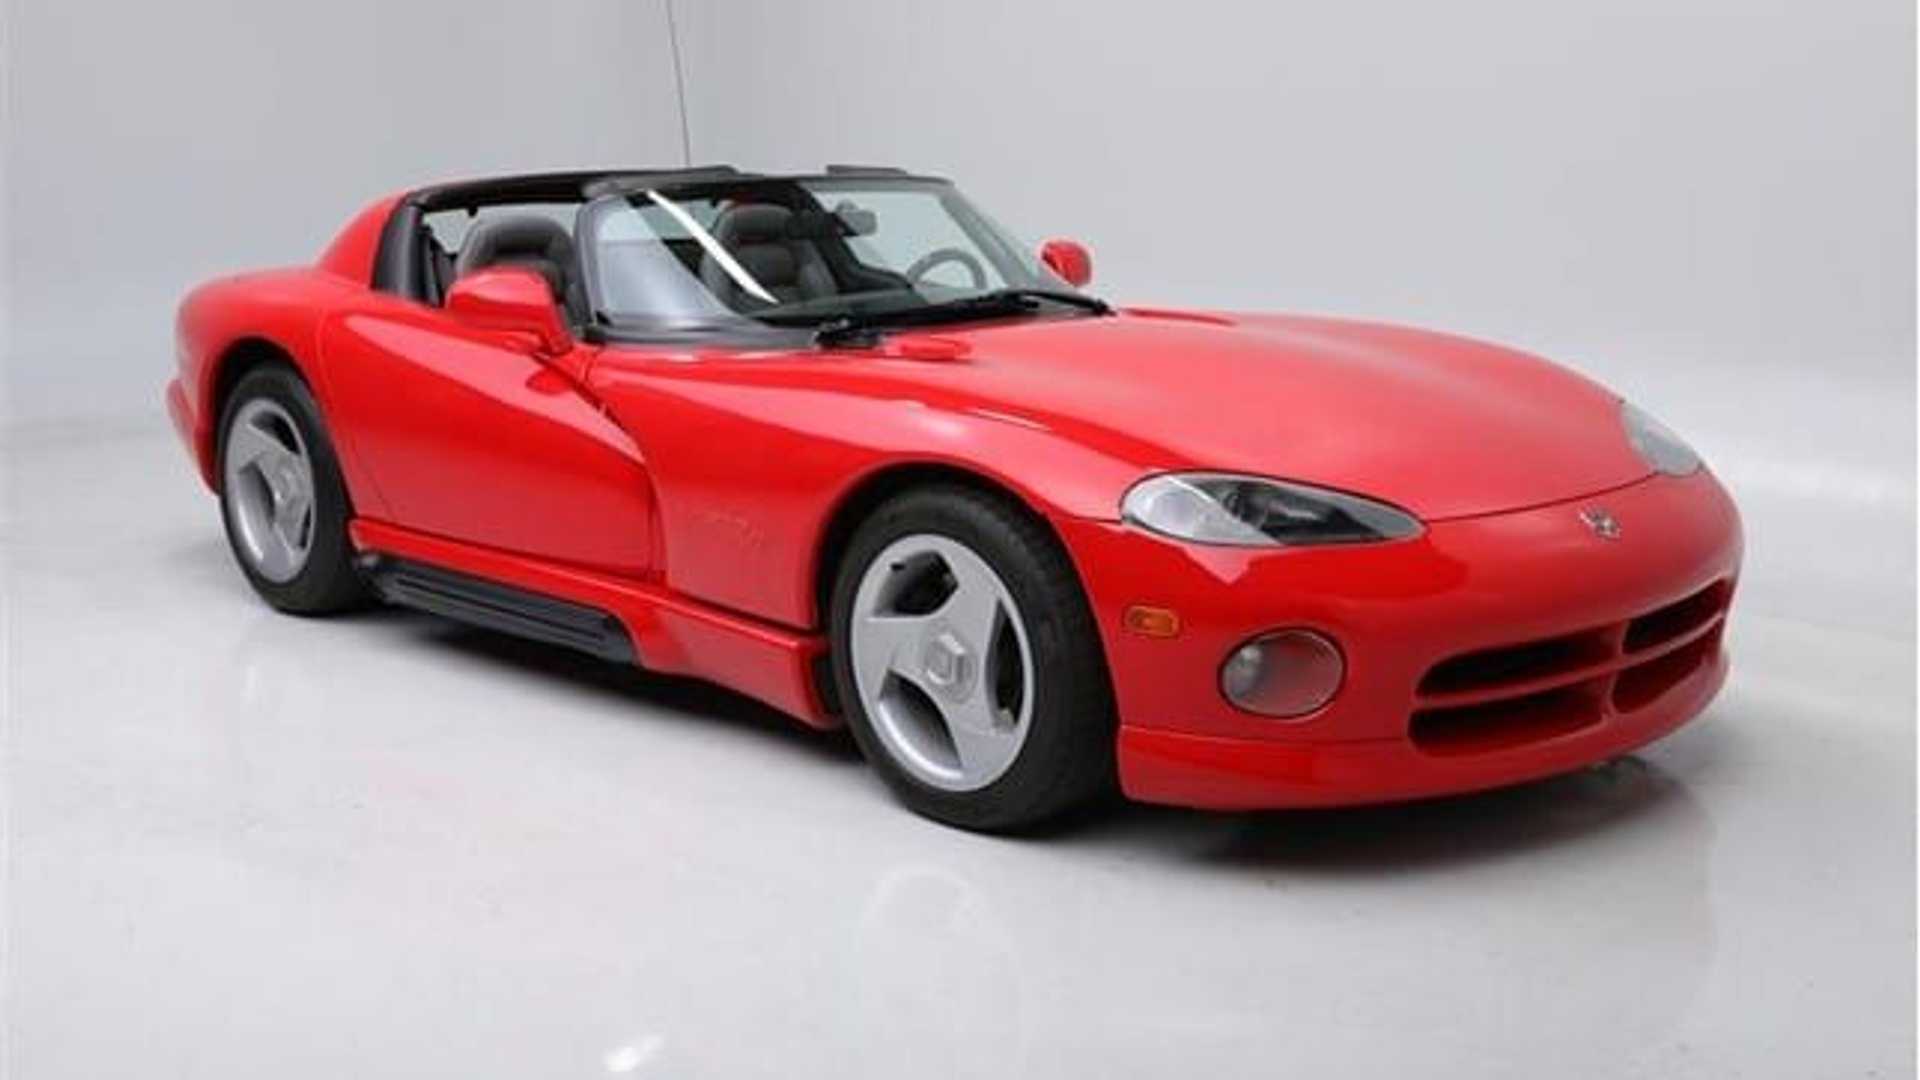 1991-1995 Dodge Viper RT/10 Roadster Price, Specs, Photos & Review